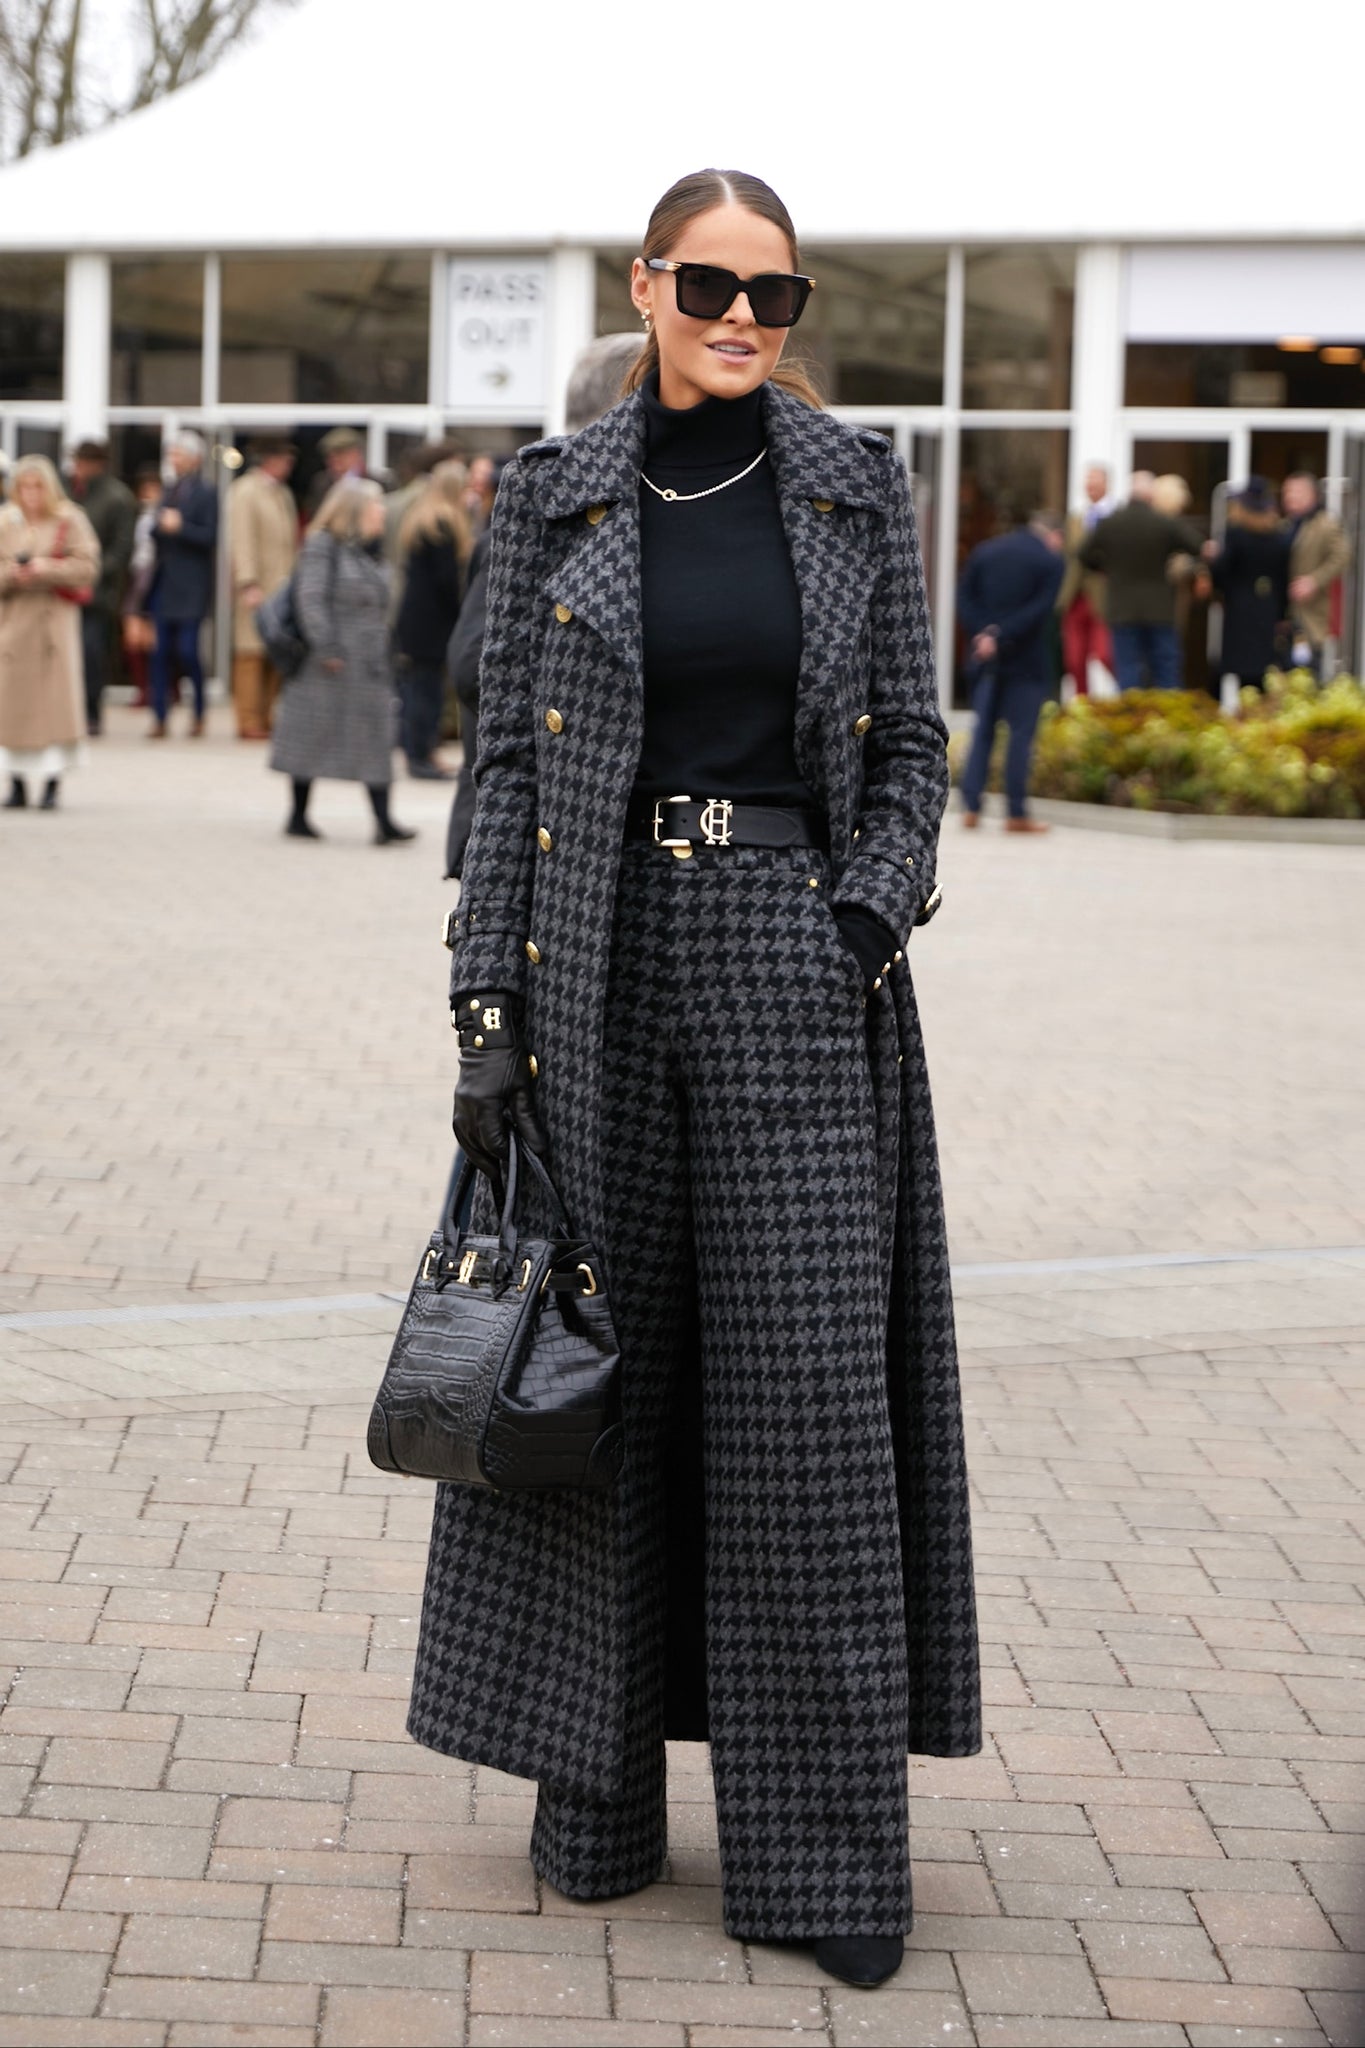 Jade's Charcoal Houndstooth Look (Charcoal Houndstooth)